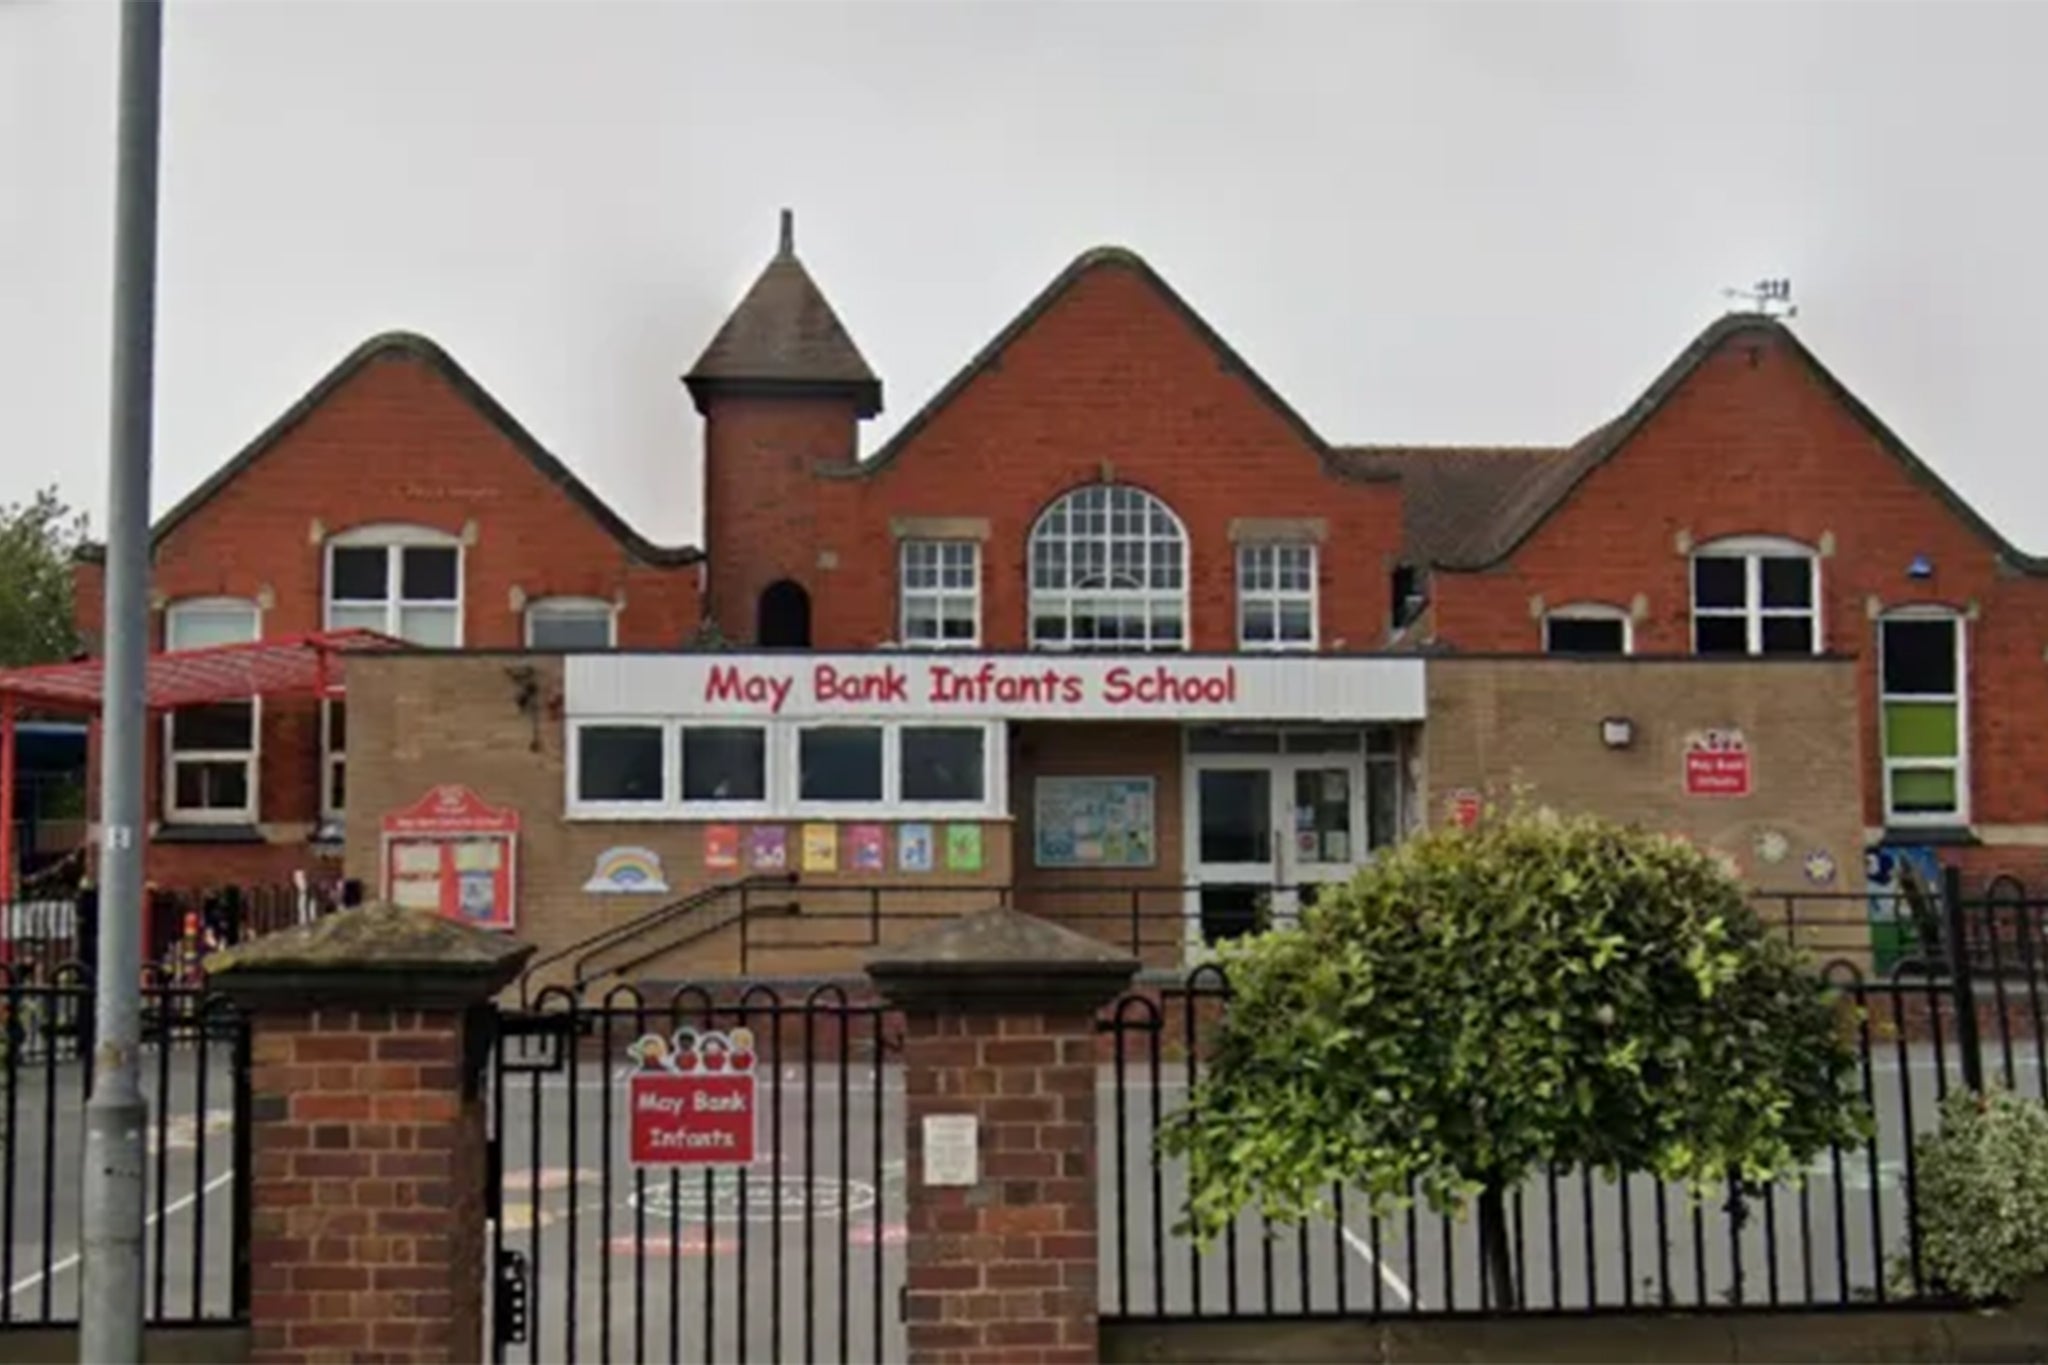 The woman was pronounced dead at May Banks Infant School